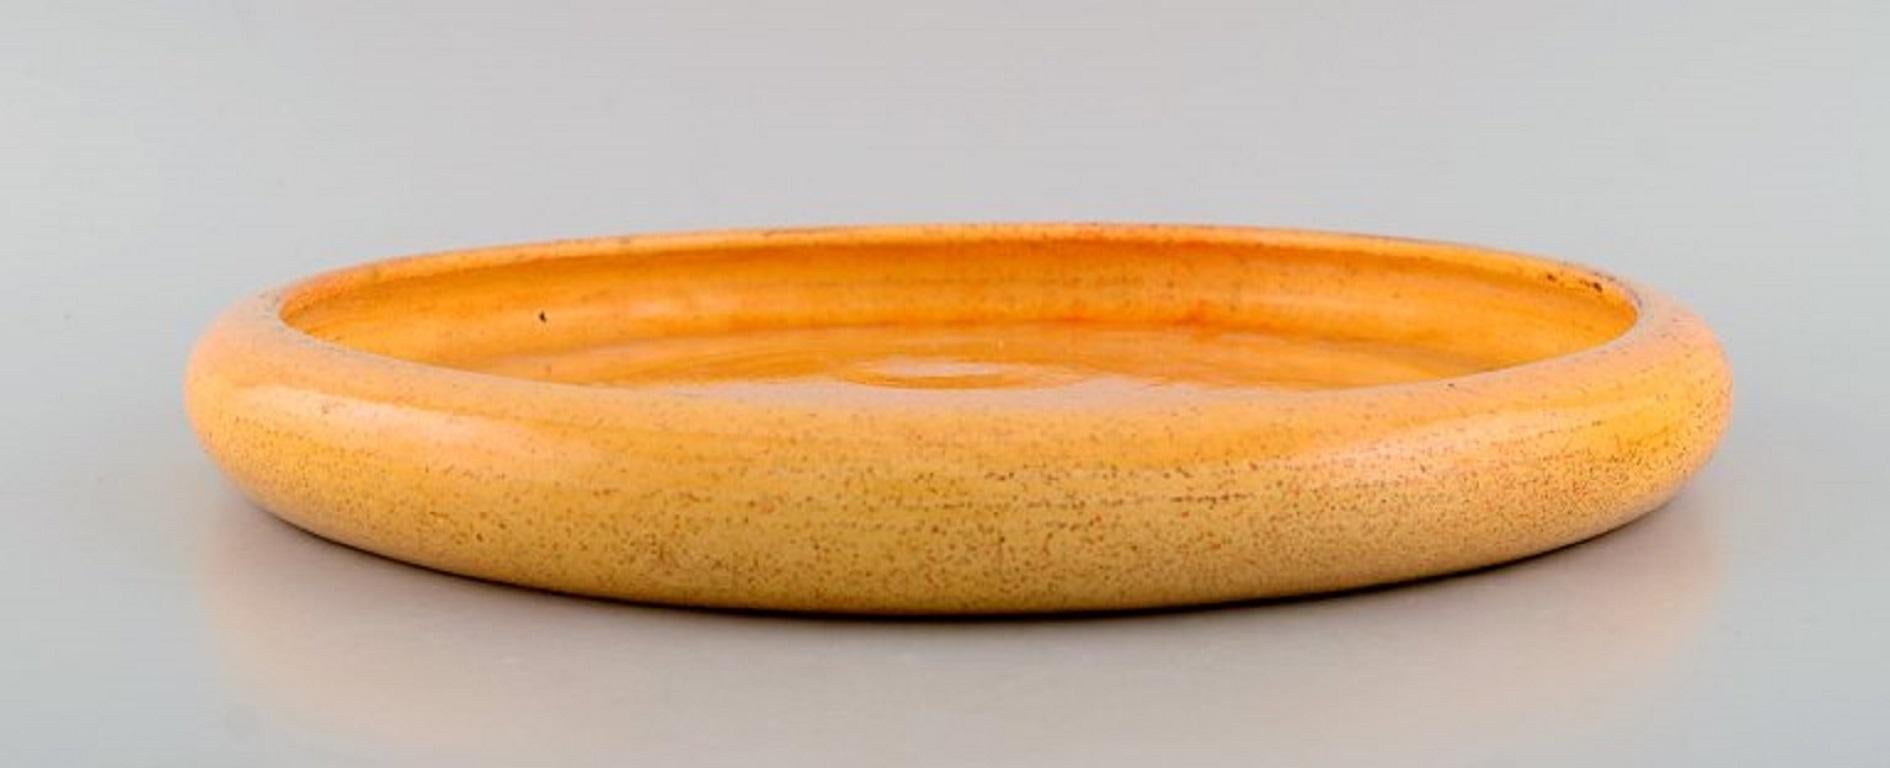 Svend Hammershøi for Kähler, HAK. Large round dish in glazed stoneware. 
Beautiful yellow uranium glaze. 1930s / 40s.
Measures: 29 x 3.3 cm.
Stamped.
In excellent condition.